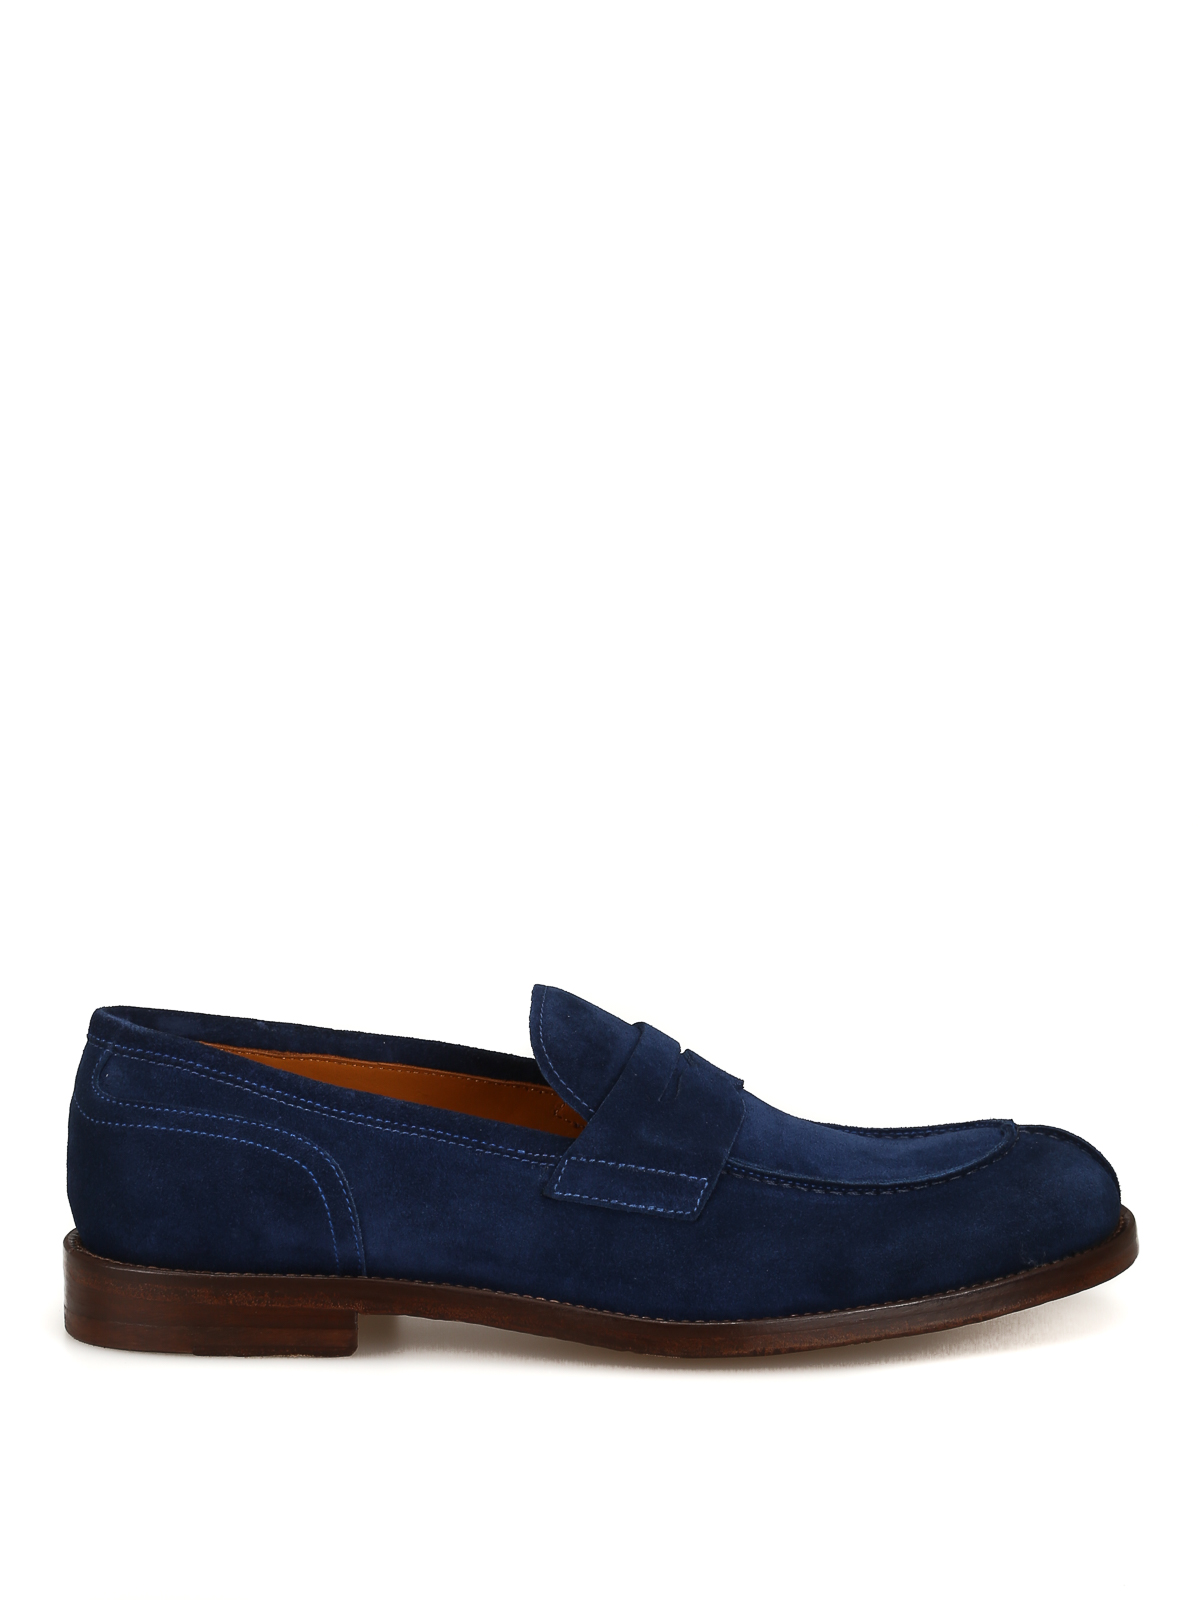 Loafers & Slippers Doucal's - Blue suede calfskin loafers ...